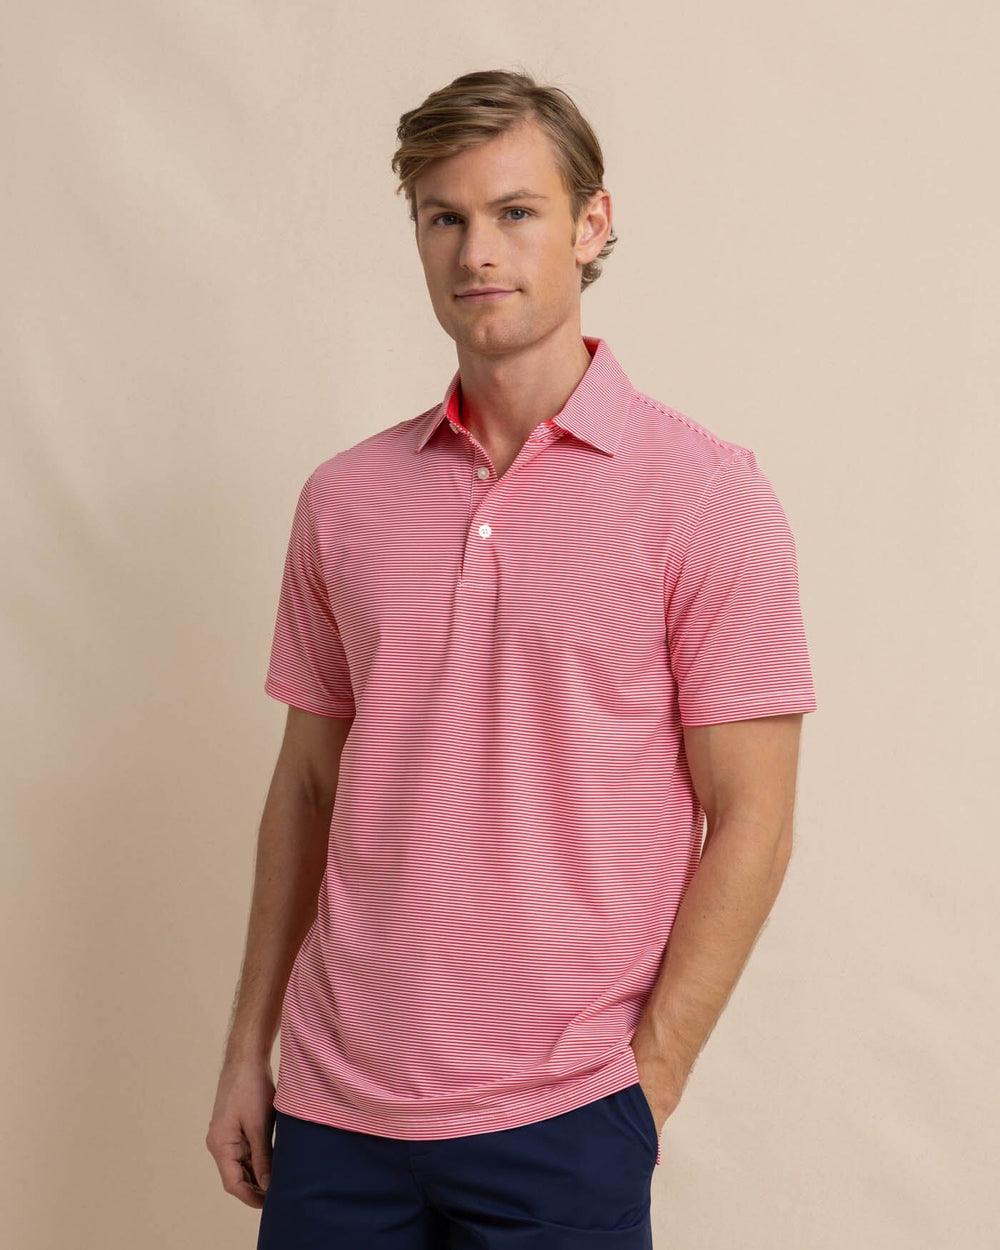 The front view of the Southern Tide brrr-eeze-meadowbrook-stripe-polo by Southern Tide - Teaberry Pink